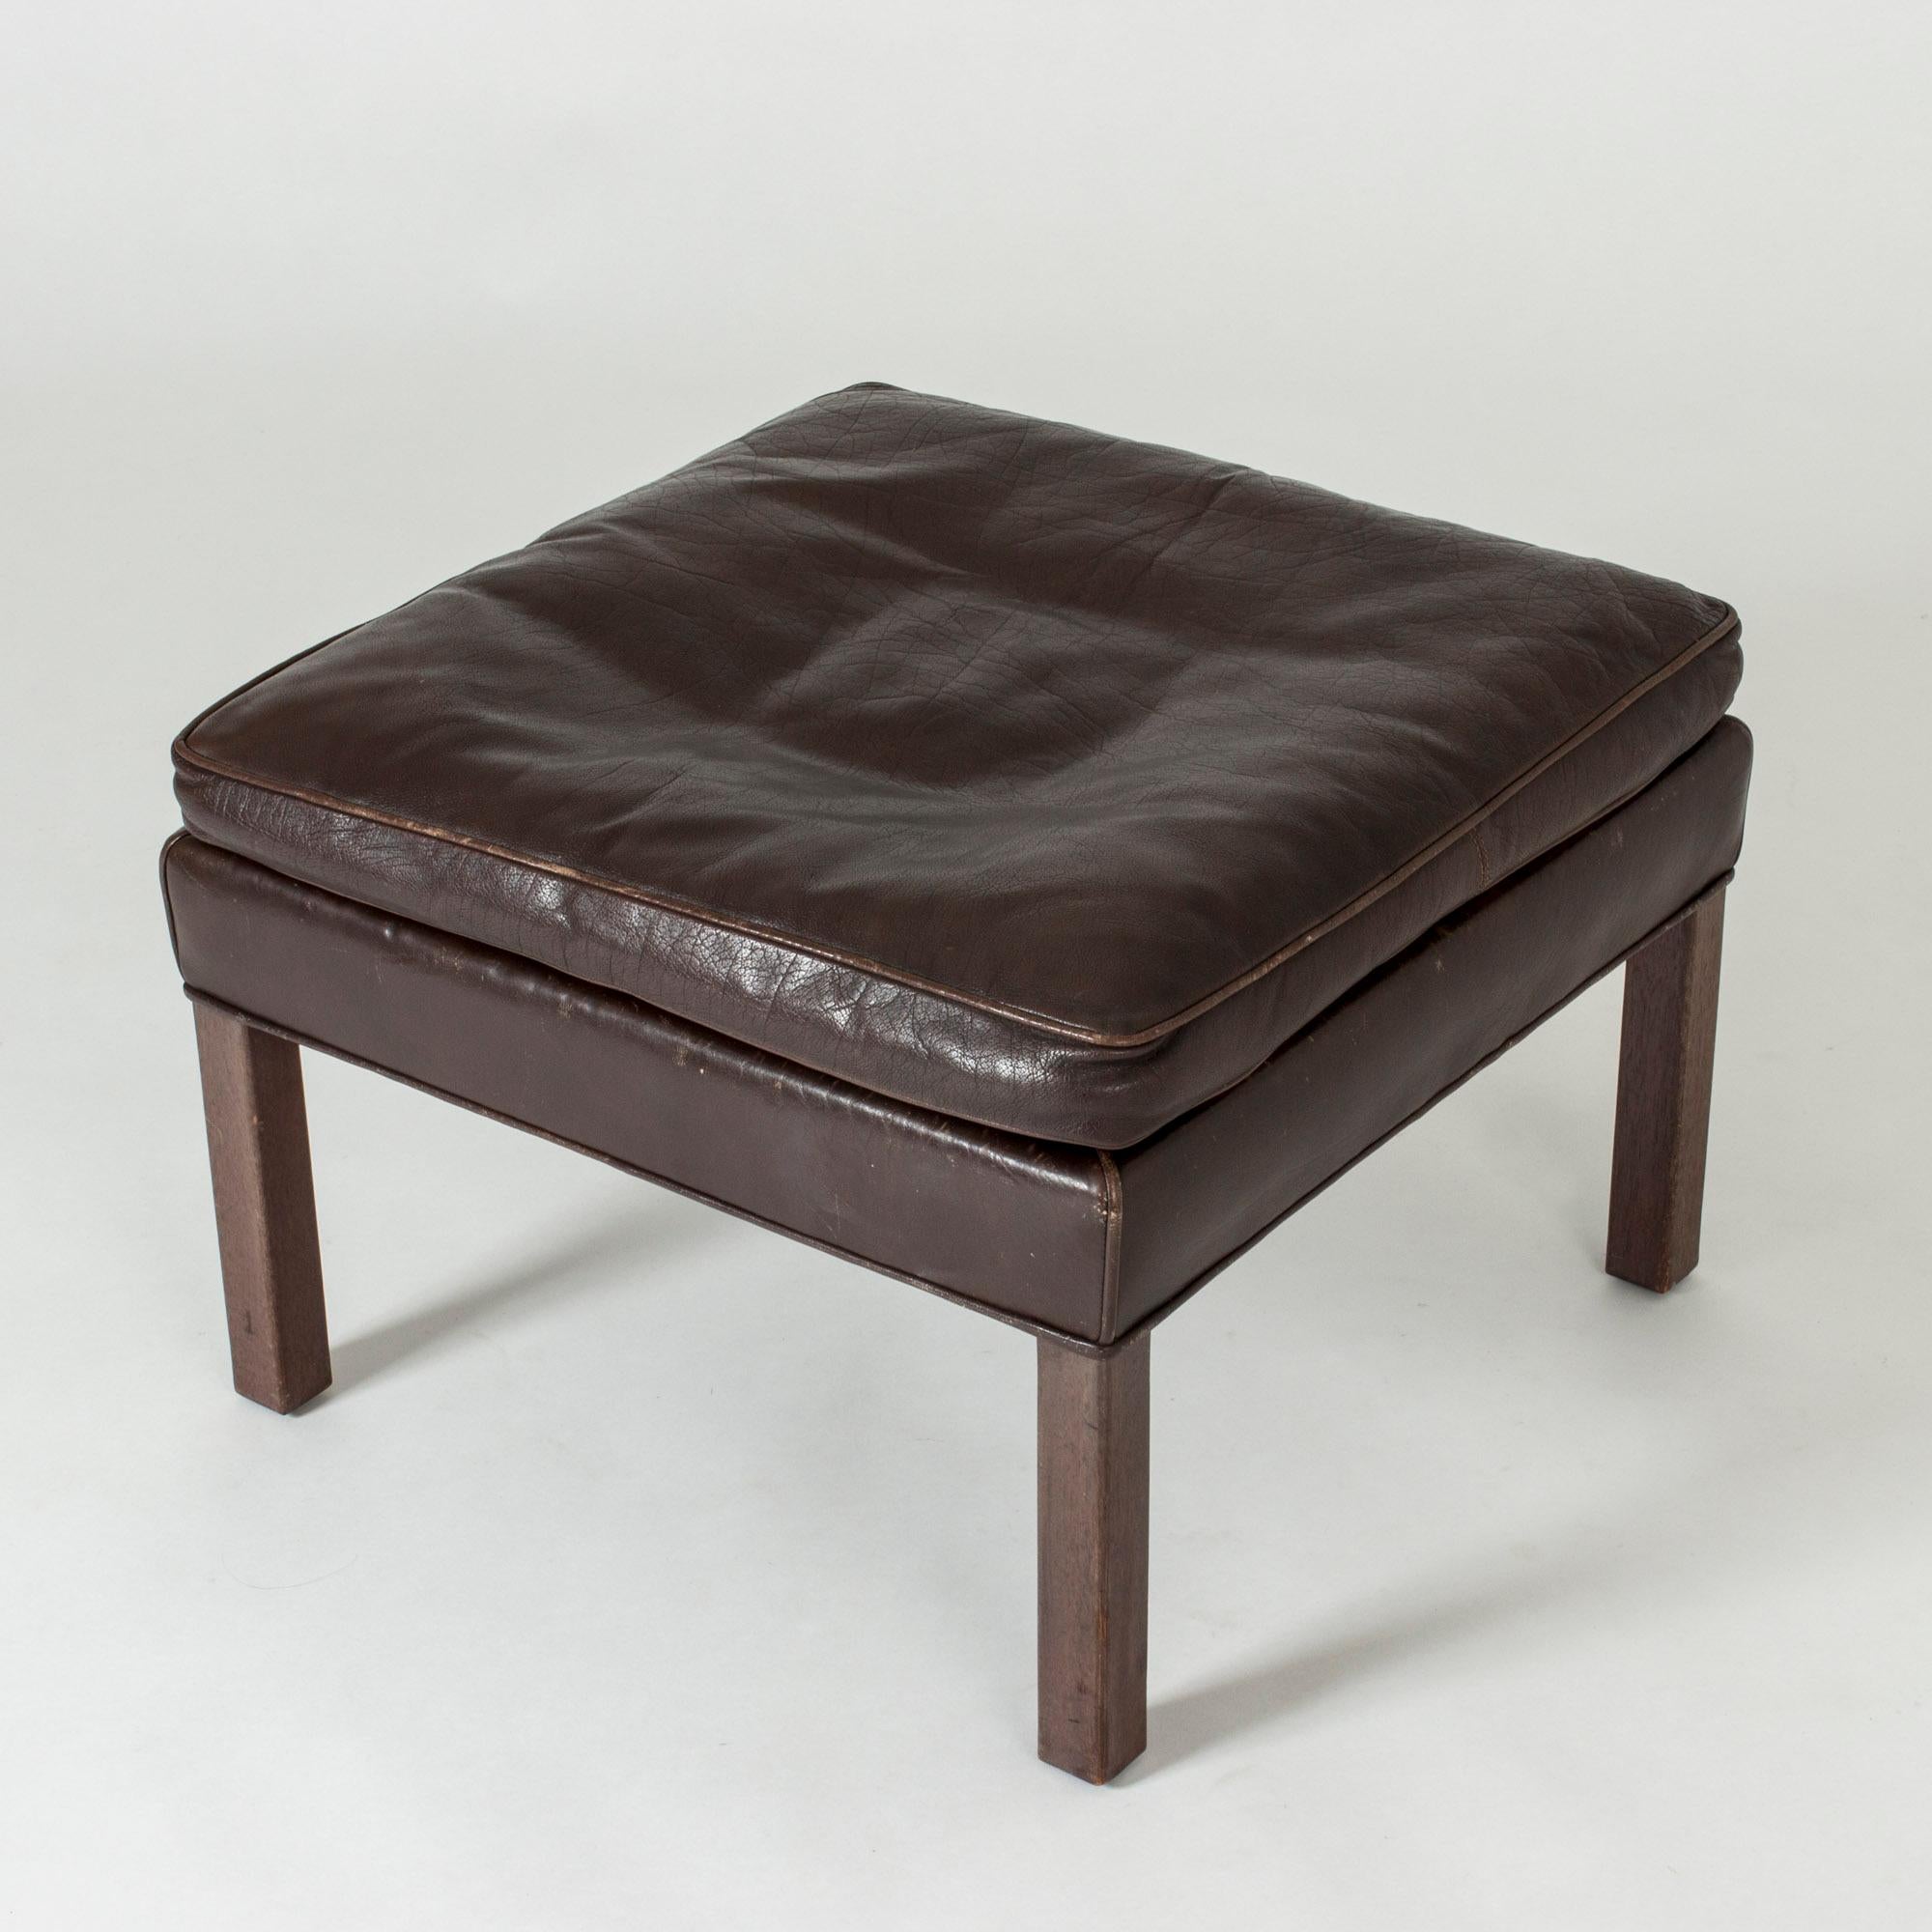 Elegant, timeless, comfortable leather ottoman by Børge Mogensen that can be combined with his sofas and armchairs or enjoyed by itself. Brown leather and rosewood legs.